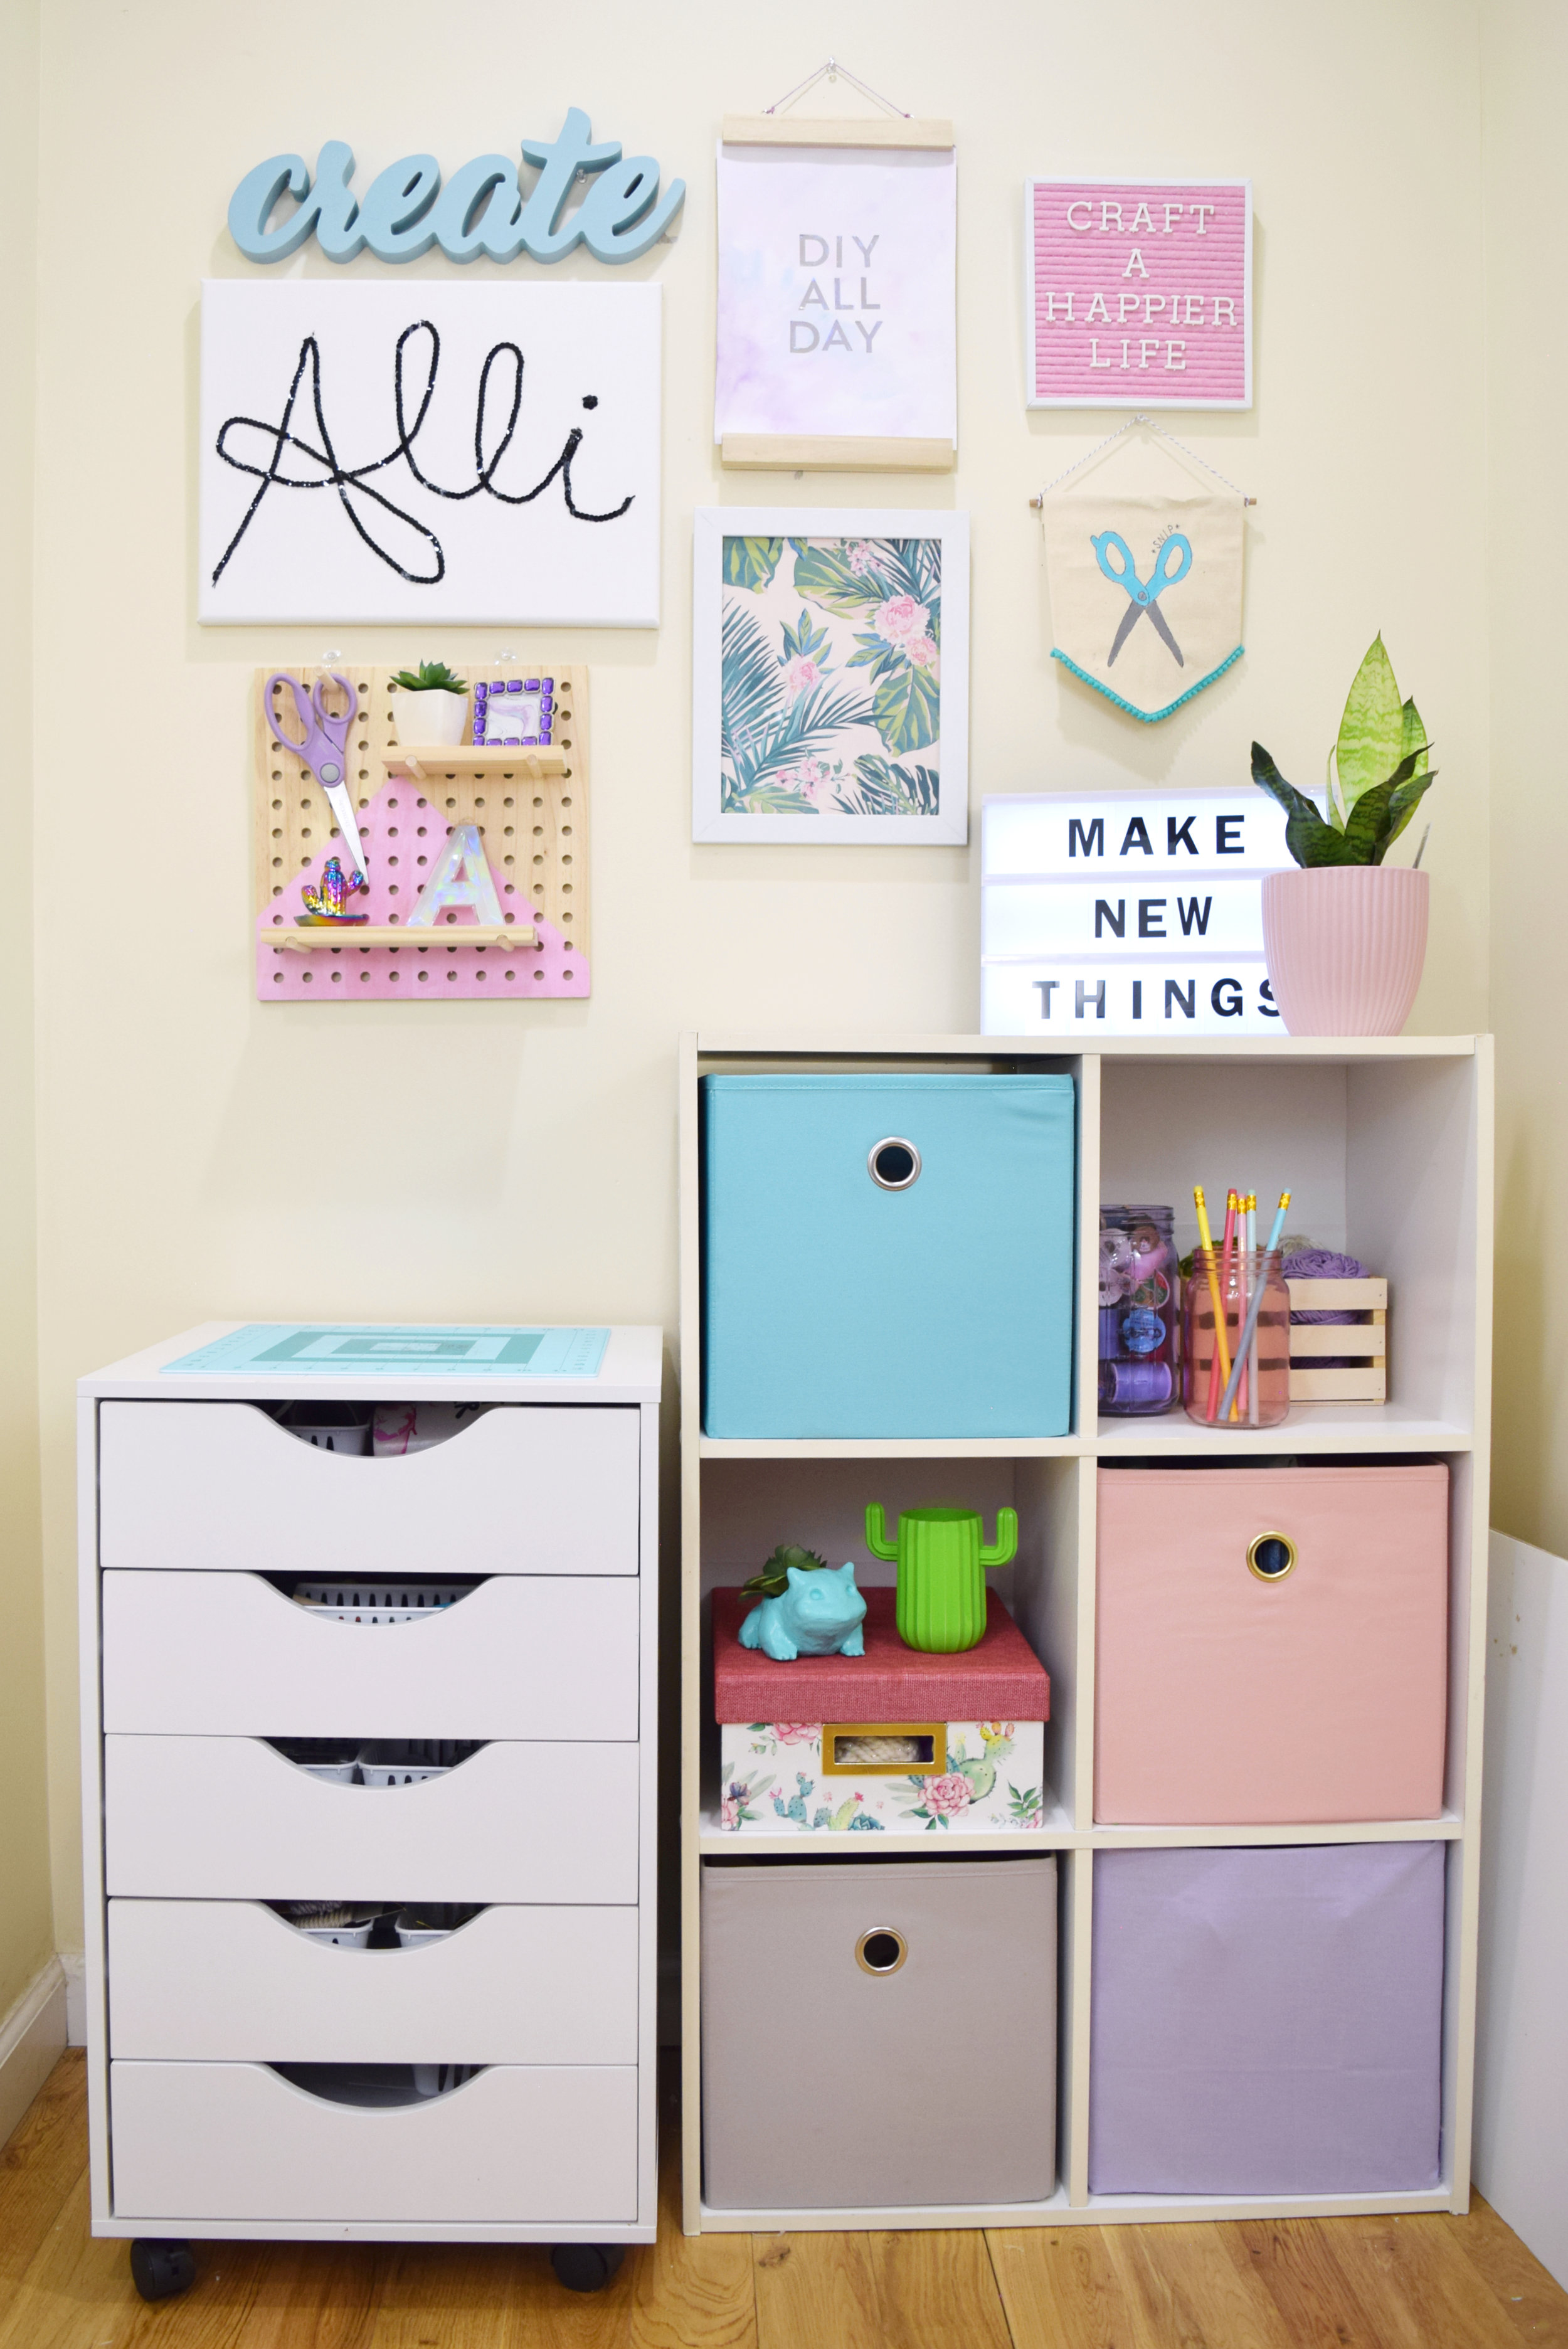 Turn Your Cluttered Craft Room Into A Creative Haven - The Tiny Life